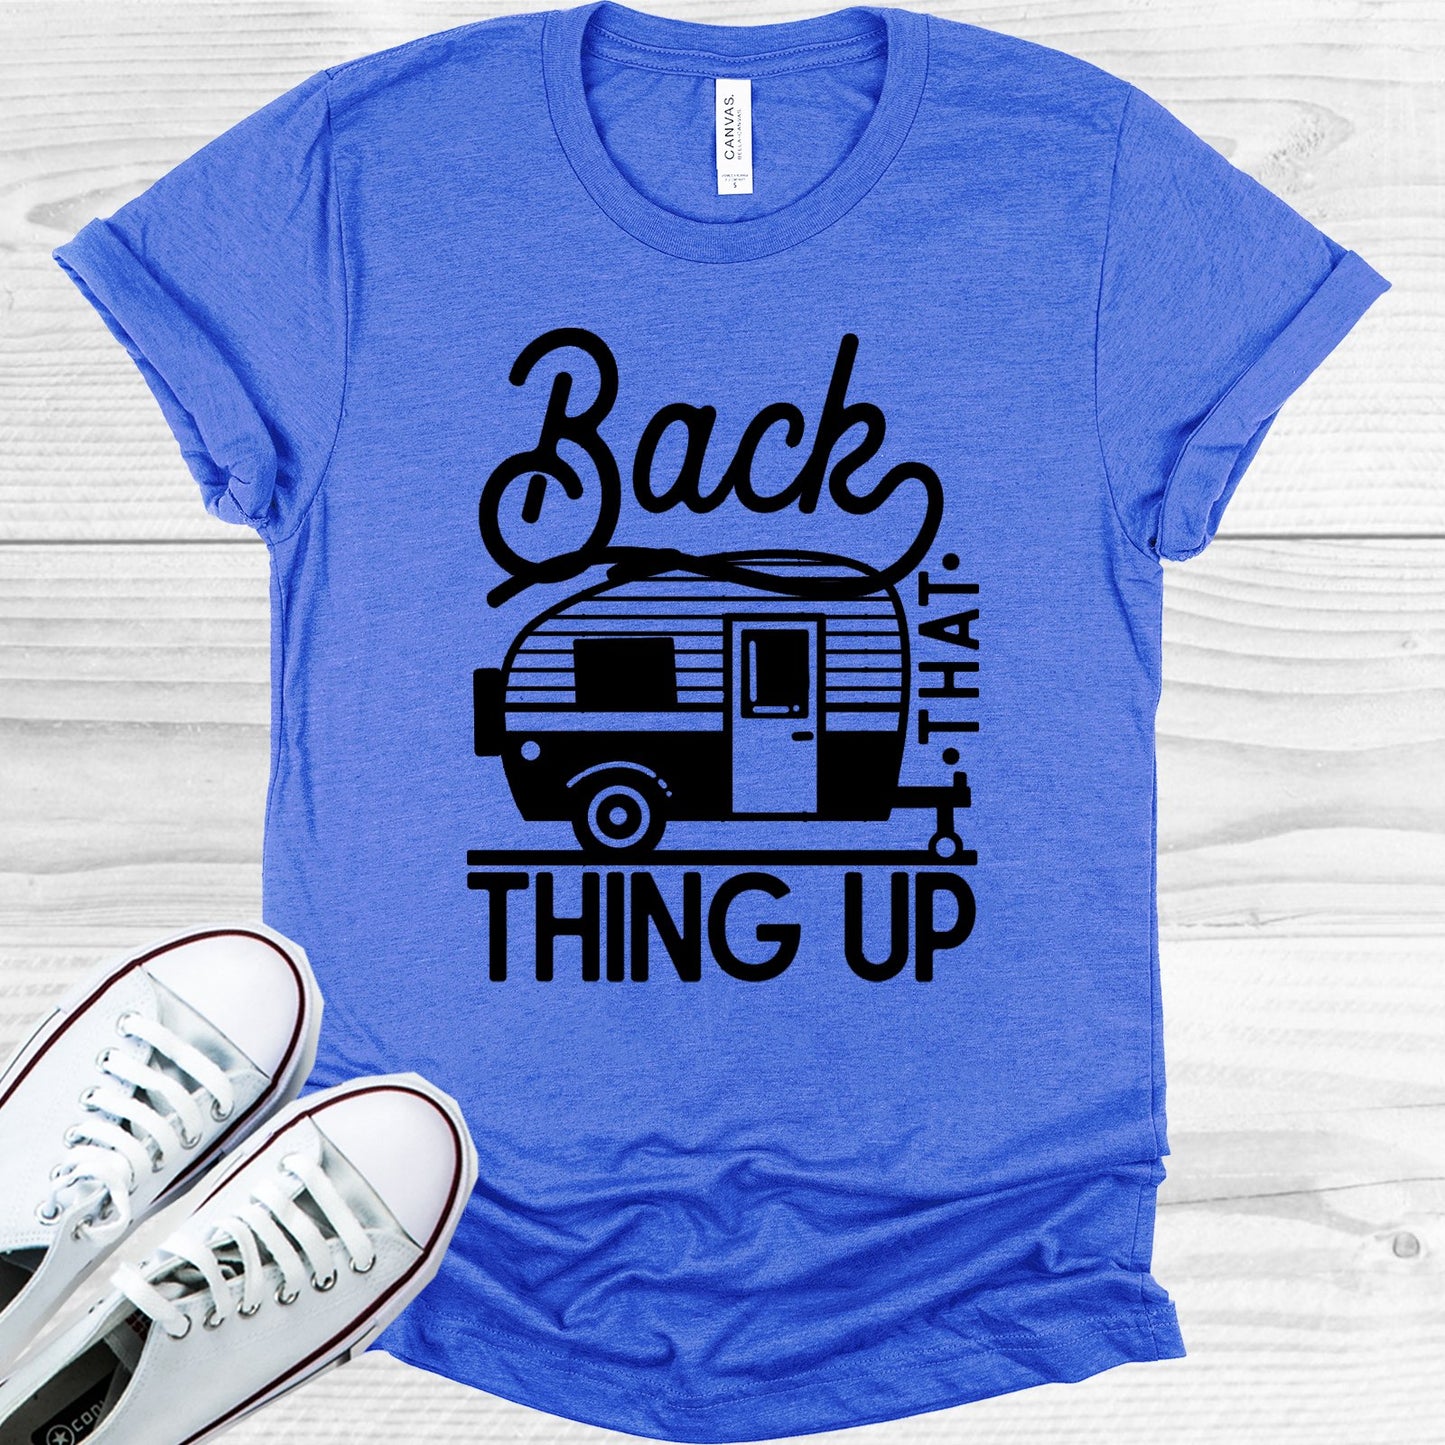 Back That Thing Up Graphic Tee Graphic Tee